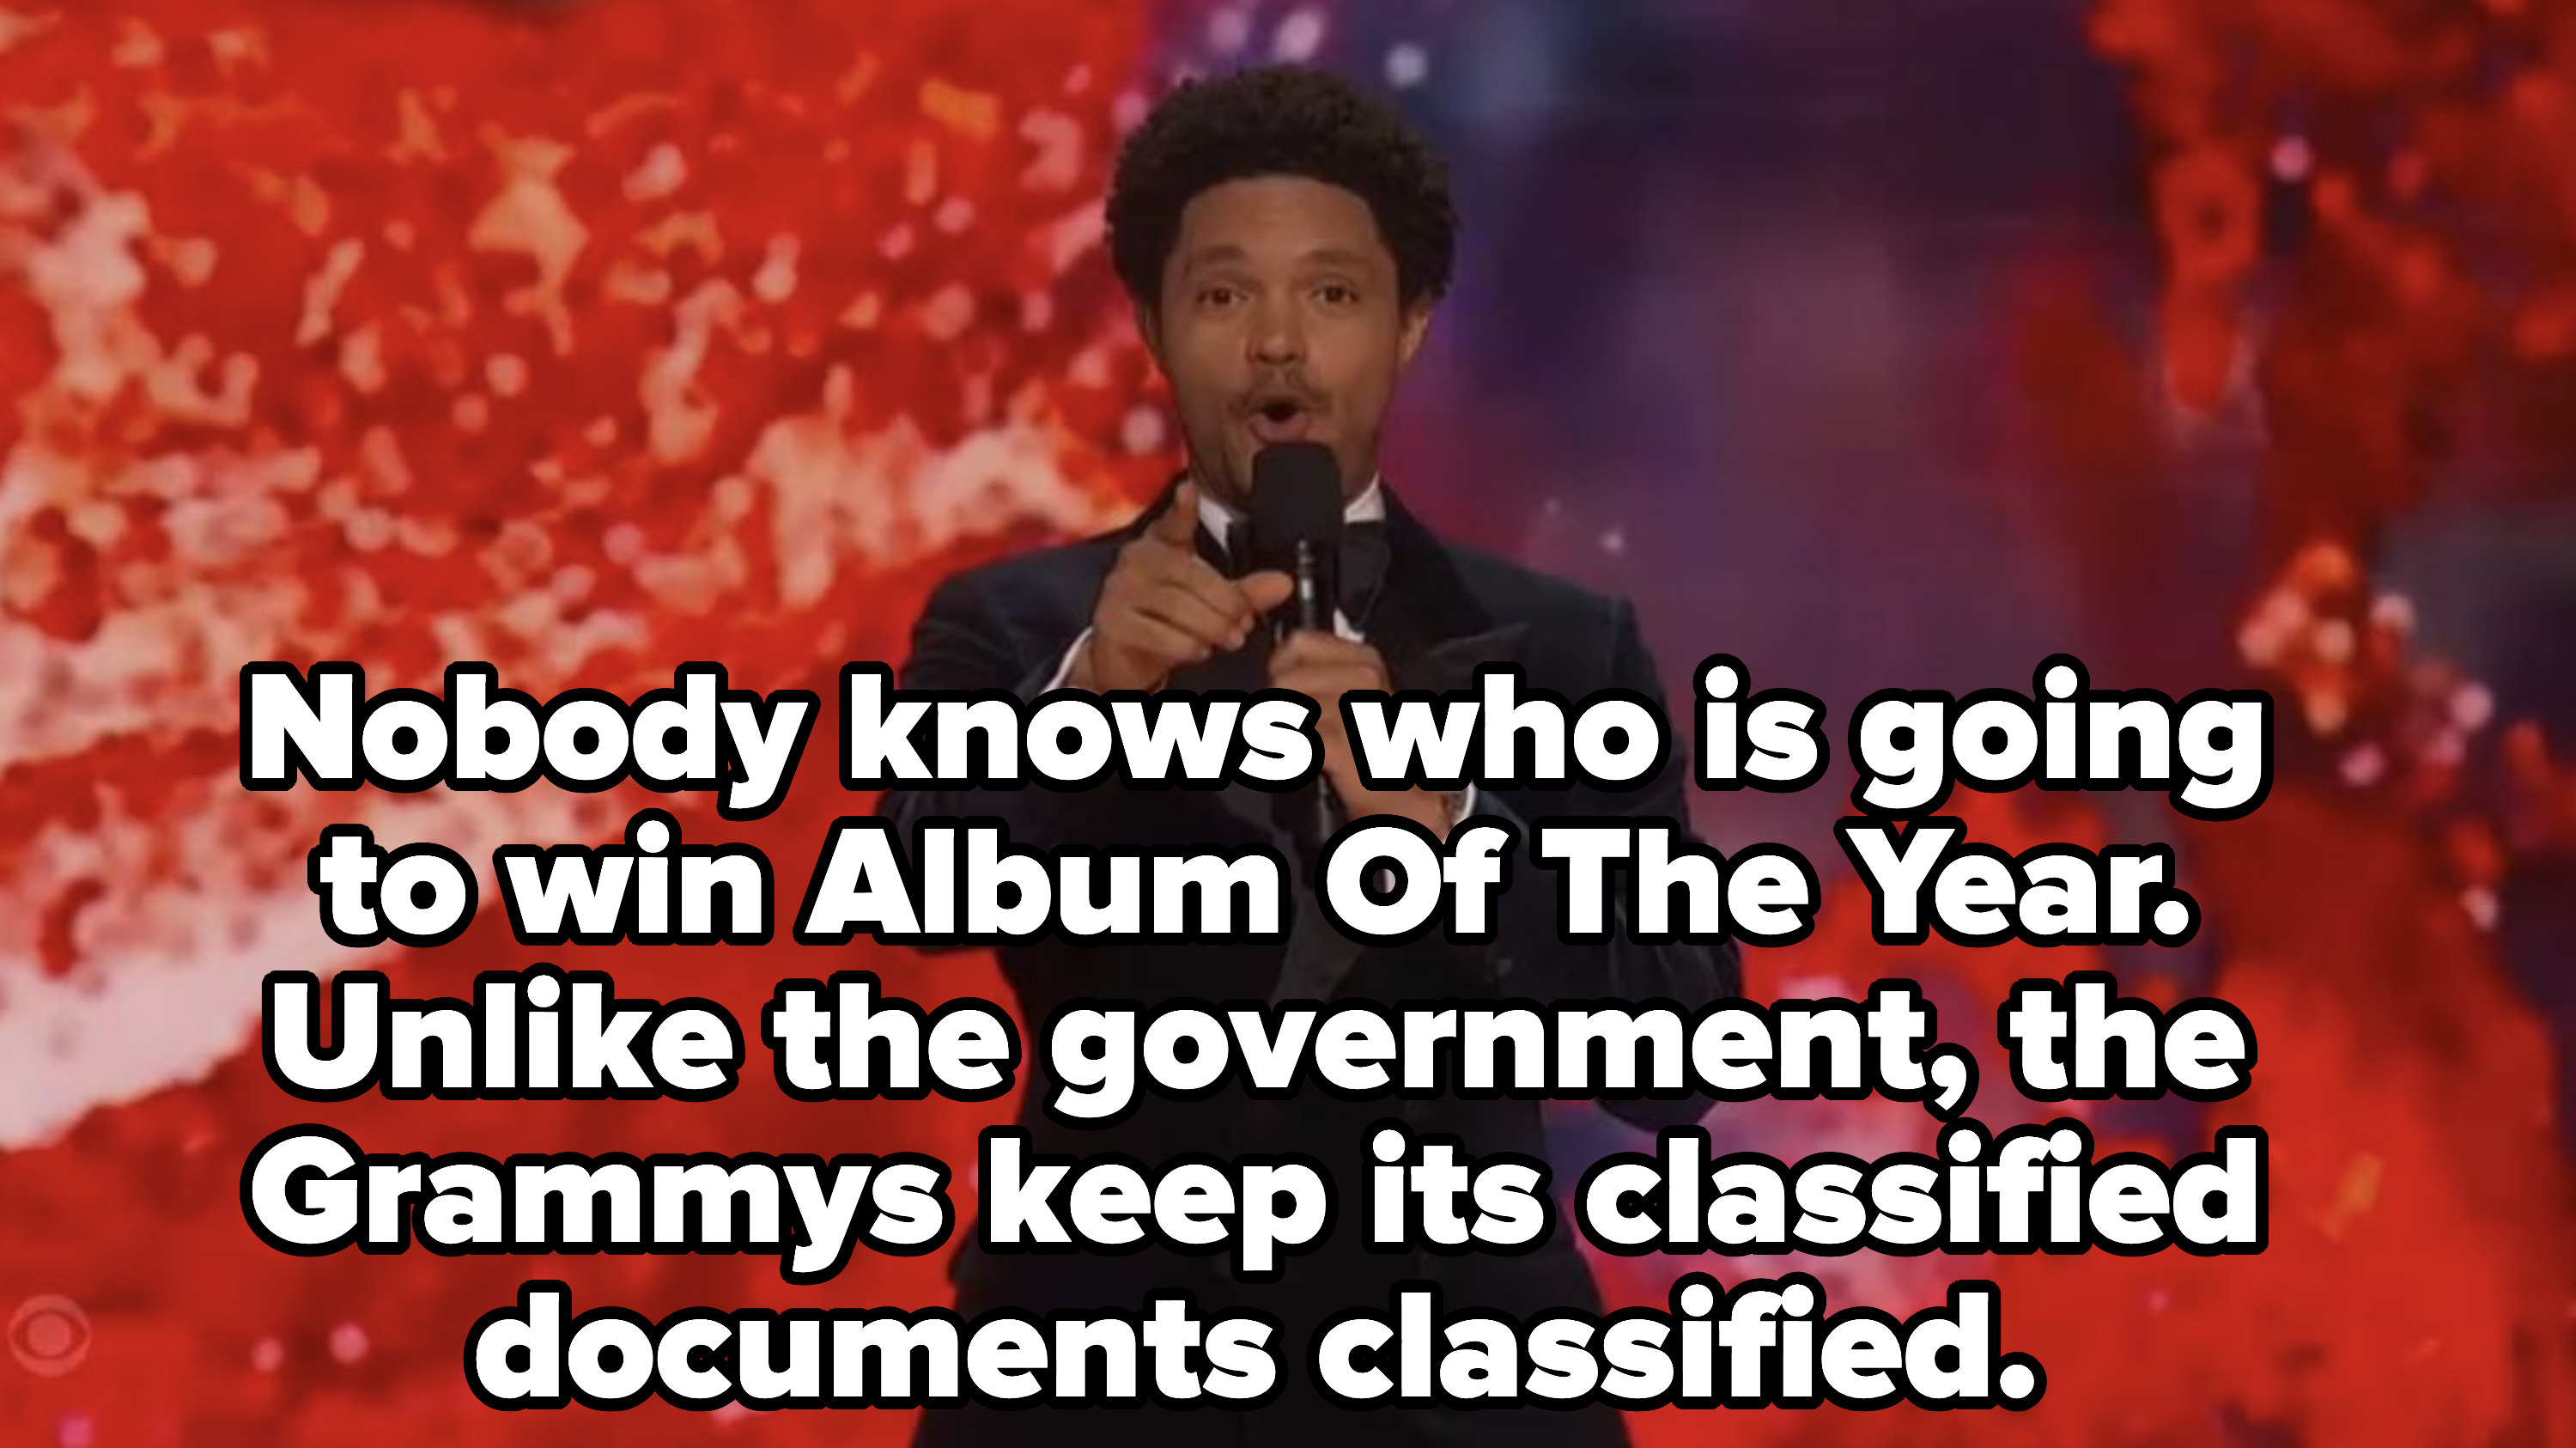 Trevor Noah says the Grammys know how to keep classified documents classified